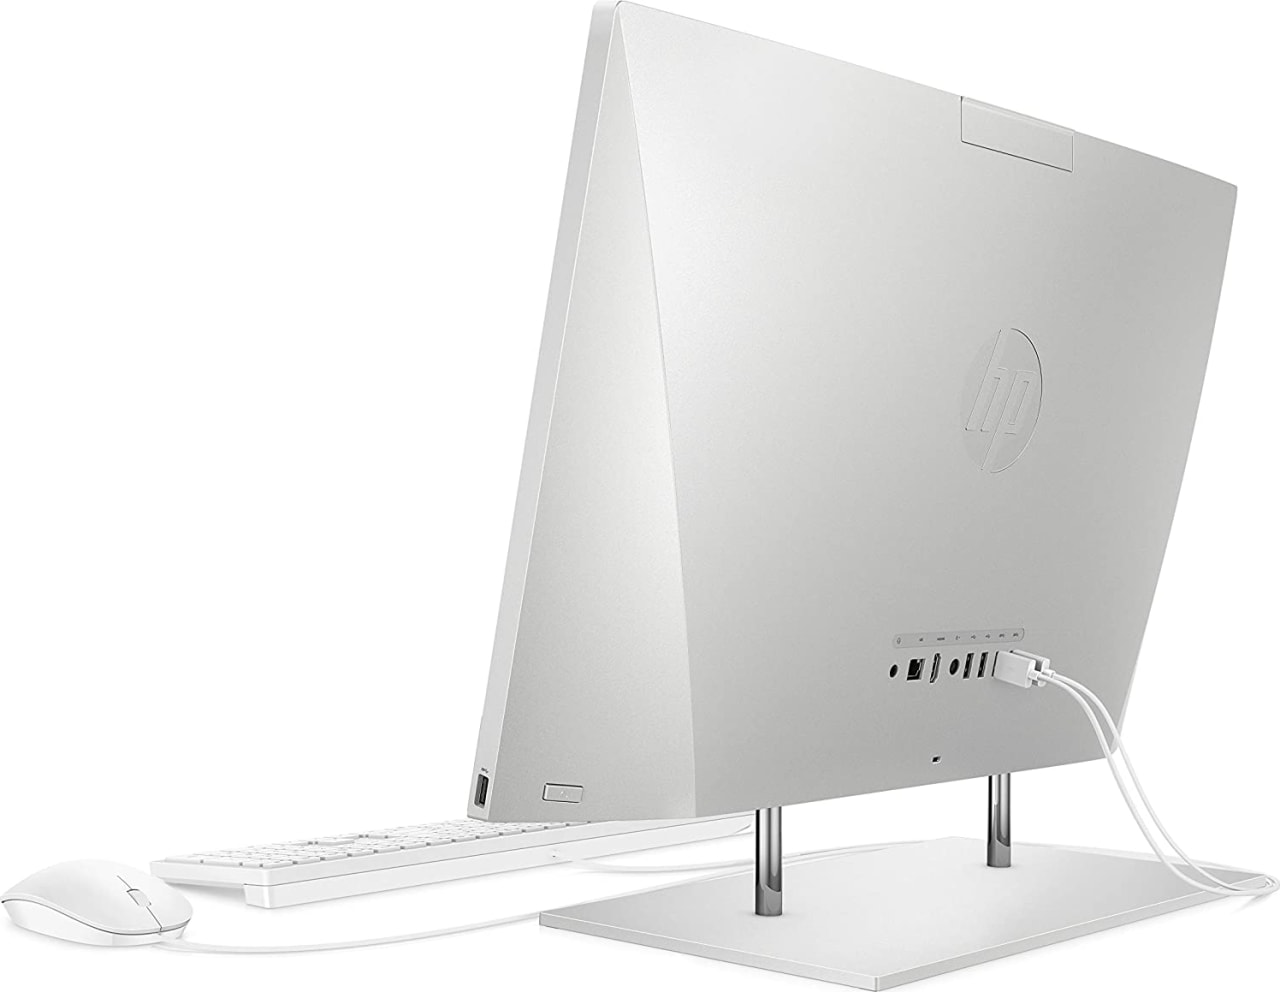 Weiß HP Pavilion 24-k1010ng All-in-One PC - Intel® Core™ i5-11500T - 8GB - 512GB SSD - Intel® UHD Graphics.2